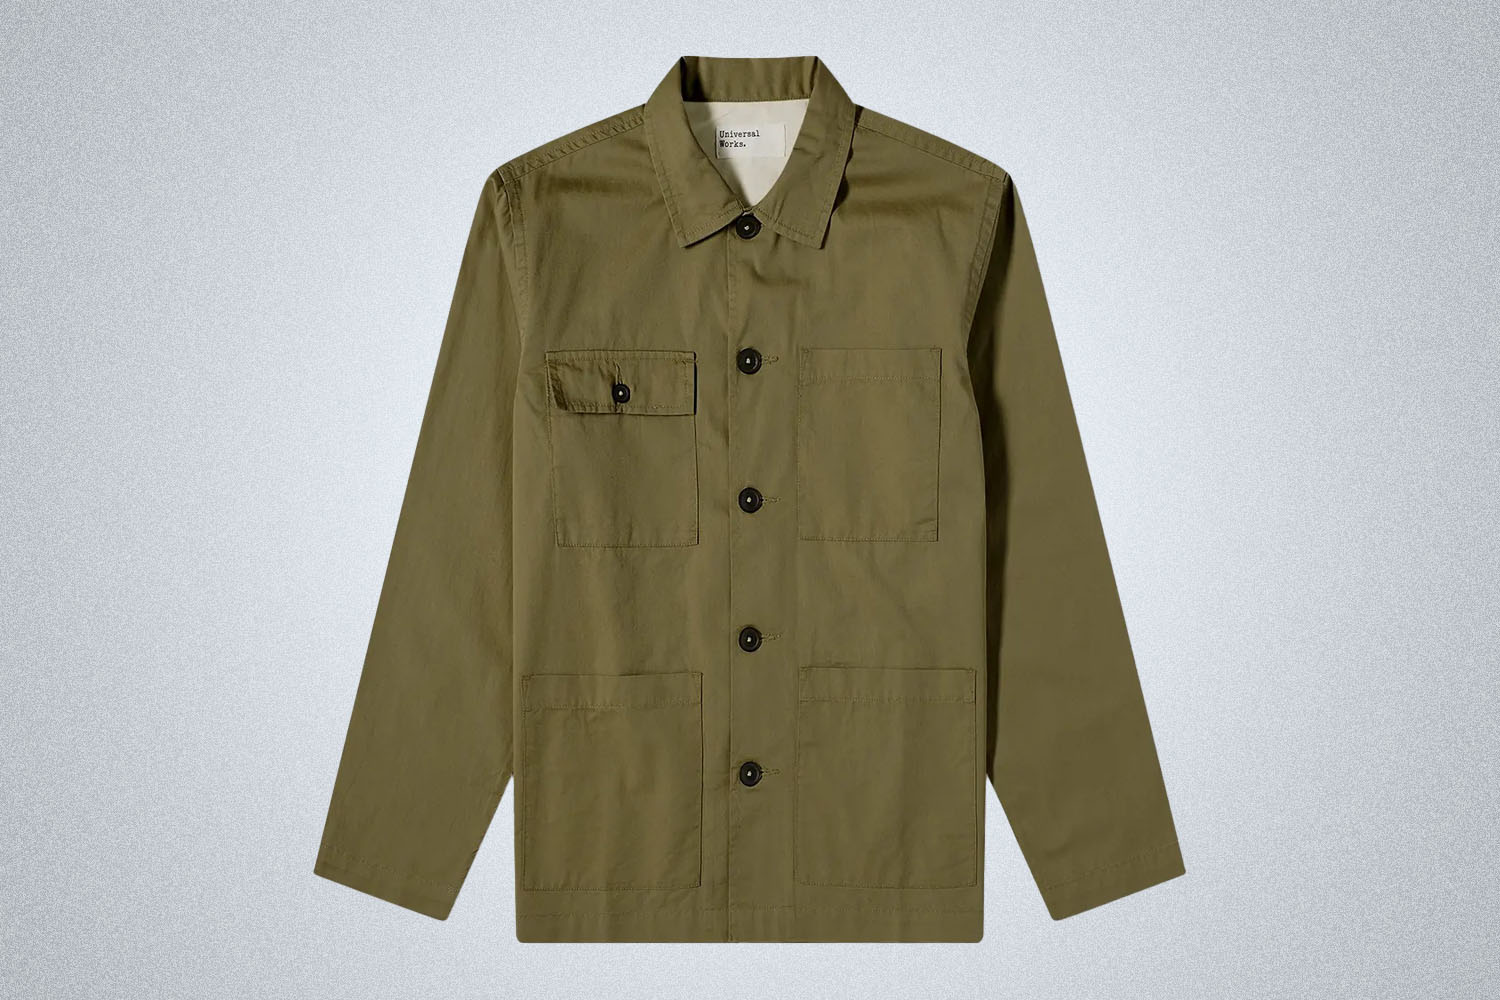 a green overshirt from Universal Works